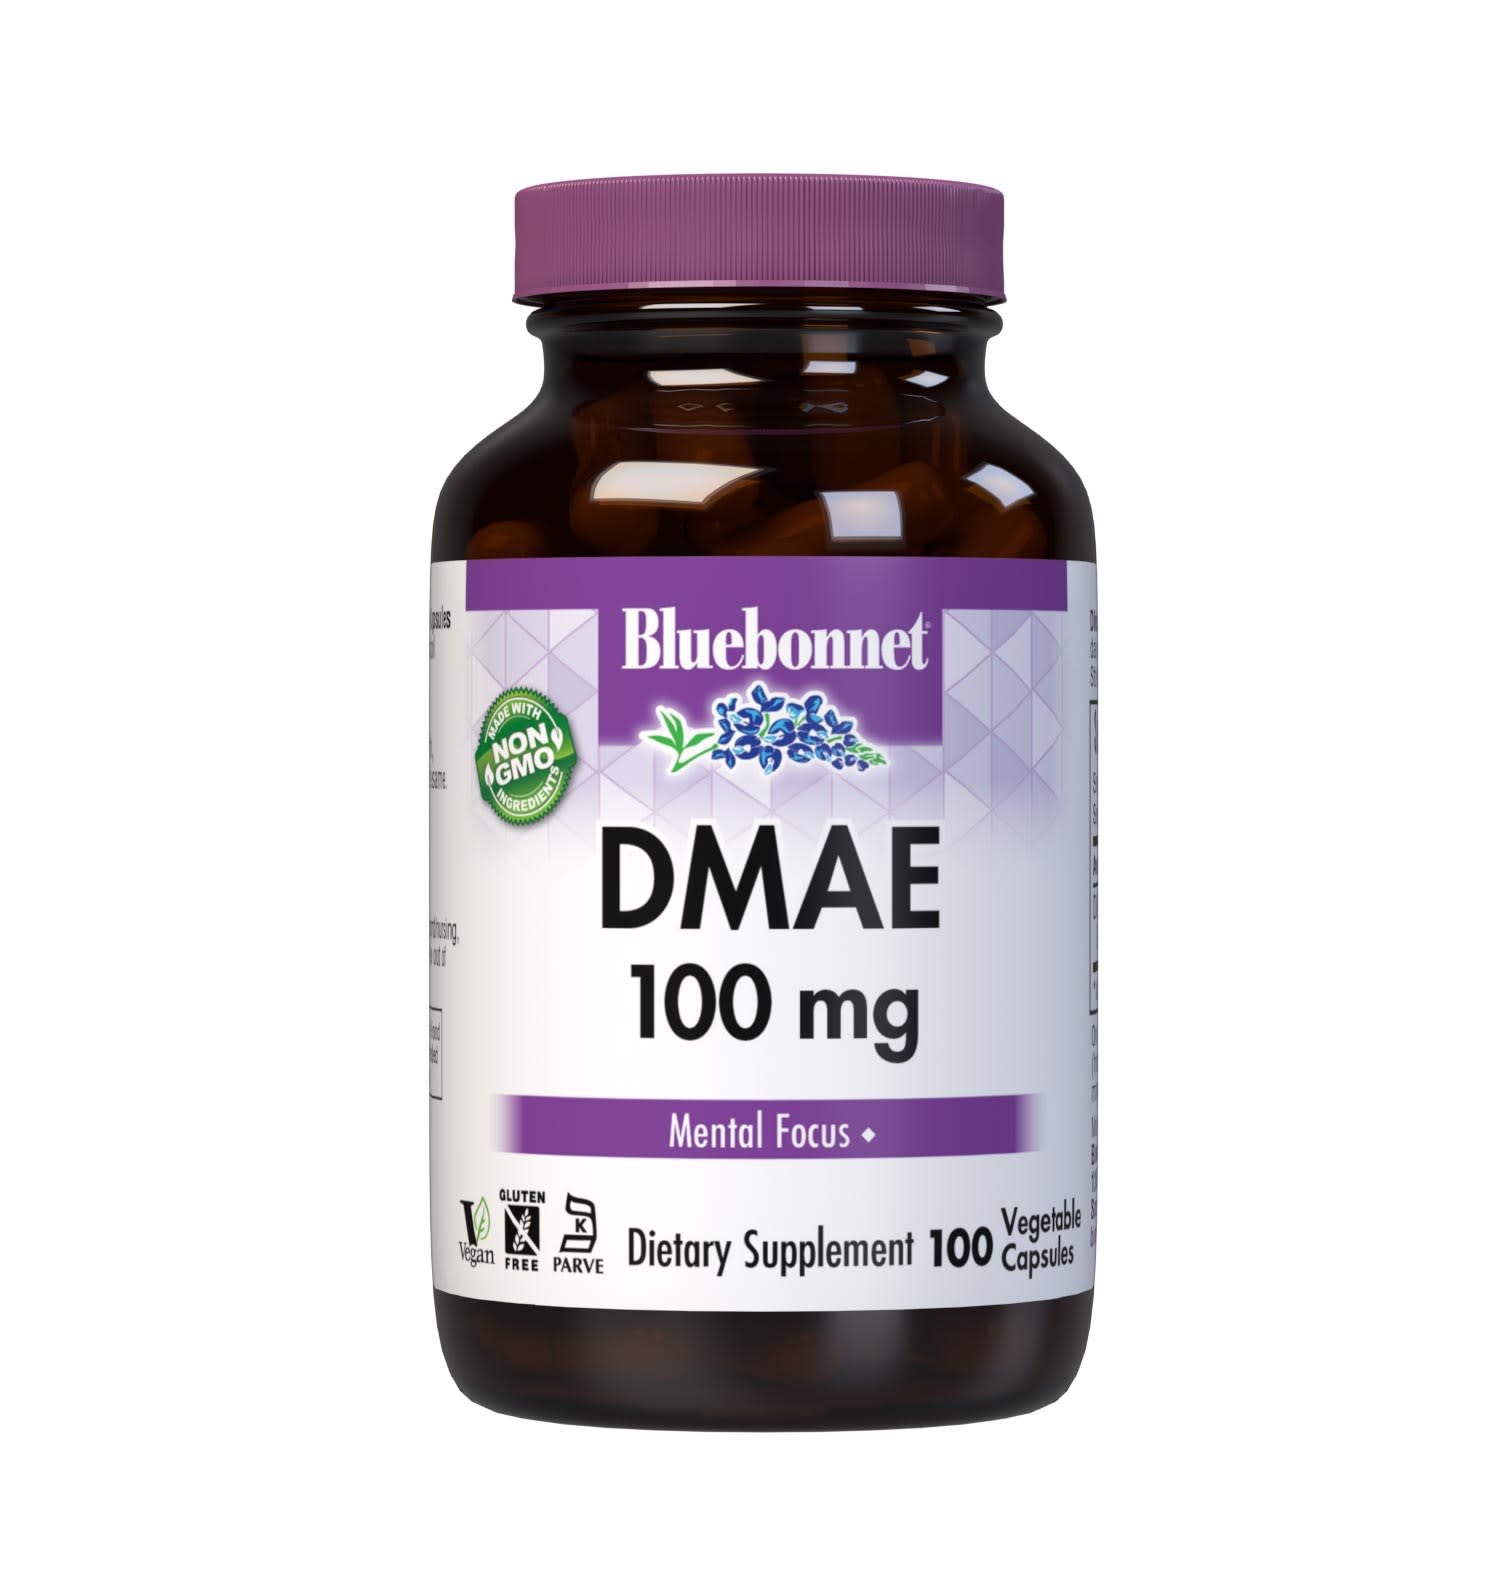 Bluebonnet’s DMAE 100 mg 100 Vegetable Capsules are formulated with 2-dimethylaminoethanol bitartrate to help support learning, memory, mental focus, and clarity. #size_100 count